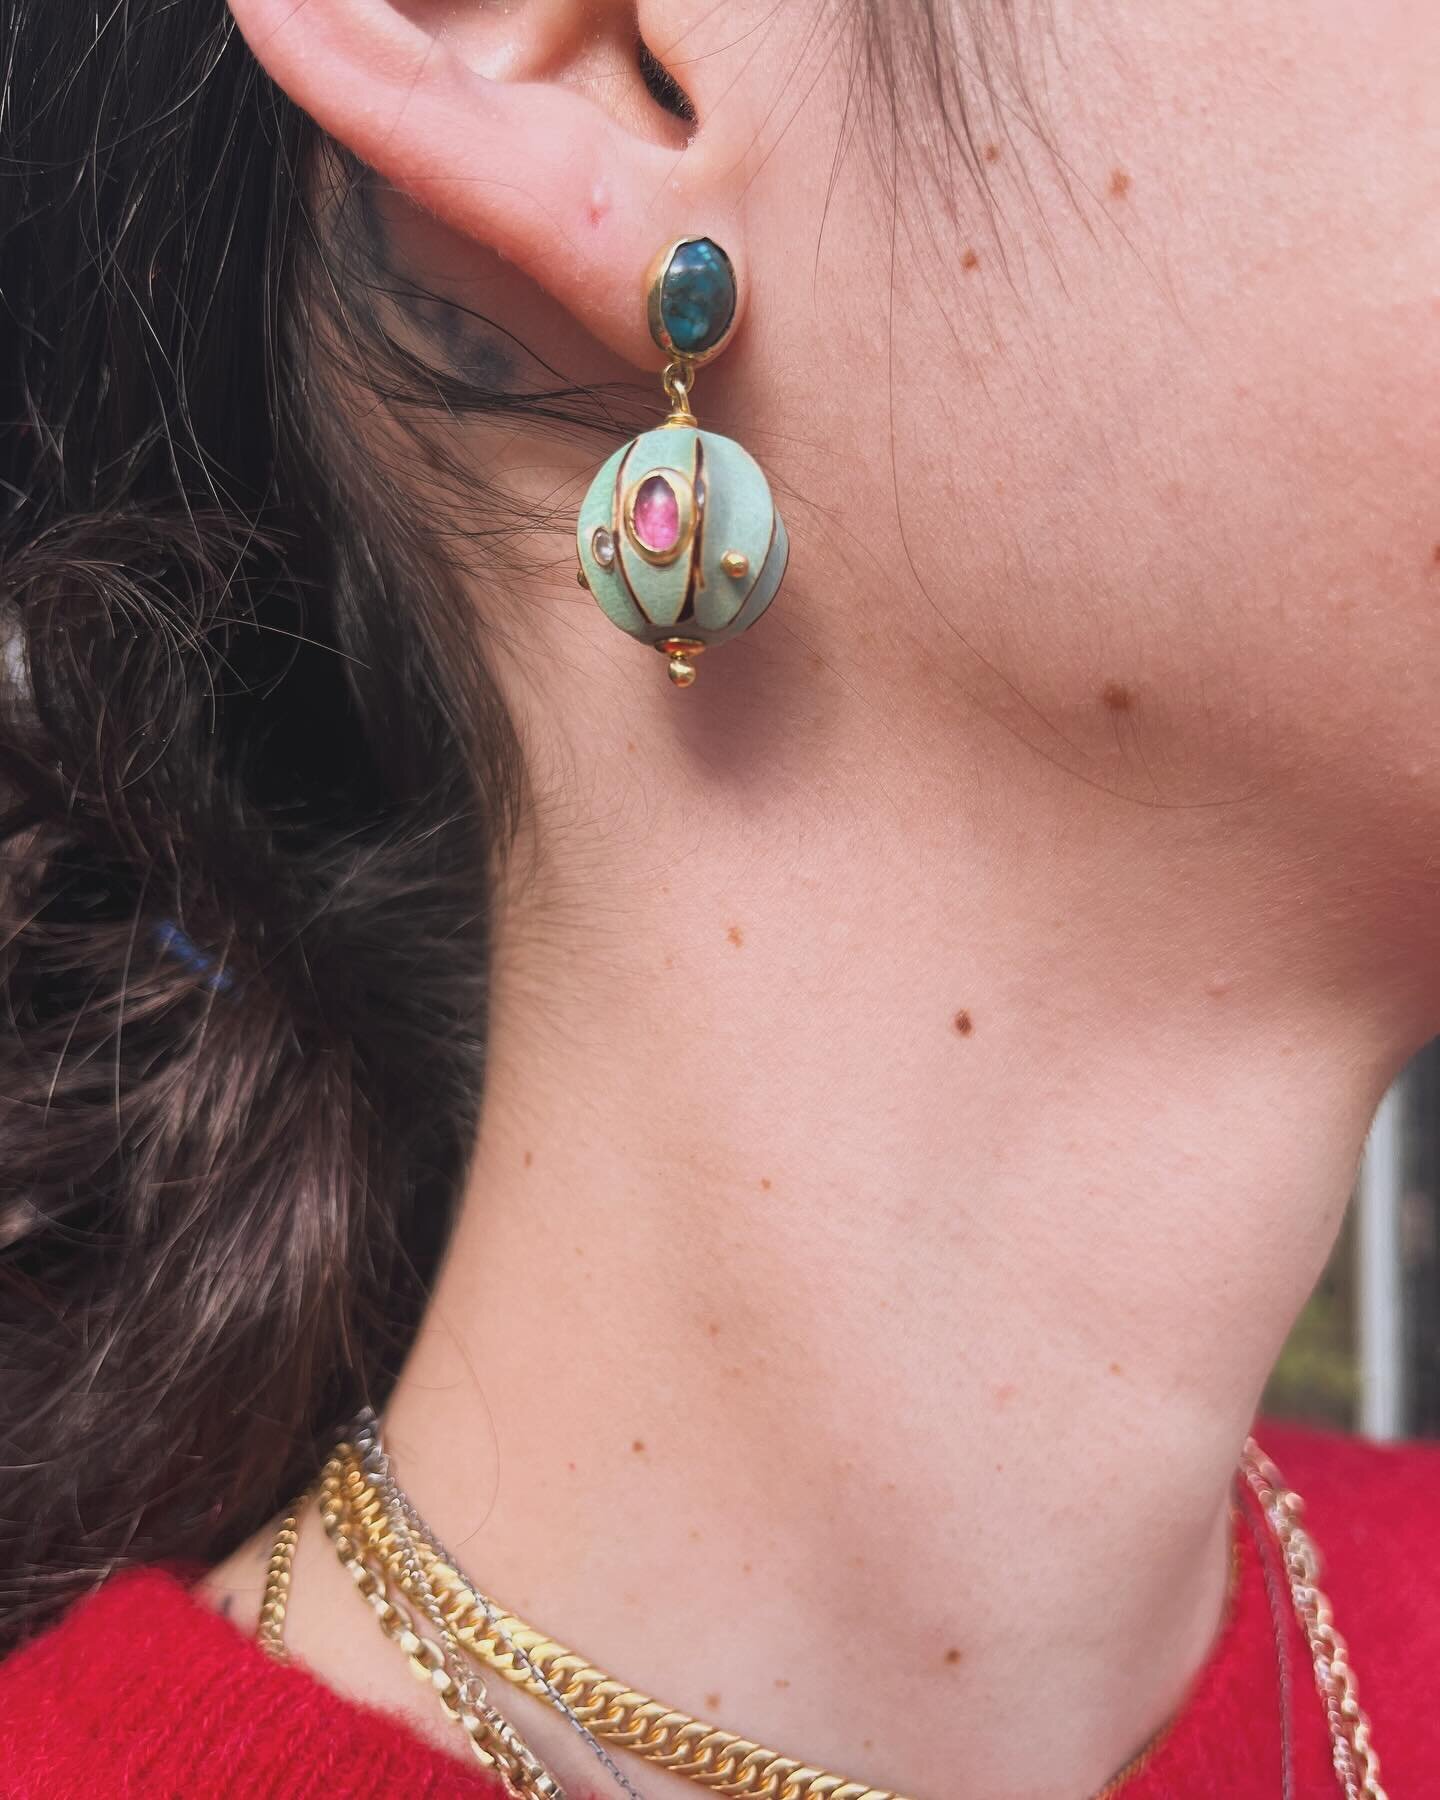 GREEN SOLD OUT | 🌳👂🏽From trees to your ears, the most unique earrings with precious gems; &ldquo;AKASYA&rdquo; are now in store.
12 different shapes, sizes and colours, 1 of each.

DM now to find out more 👅 or find us at 84 Stoke Newington Church